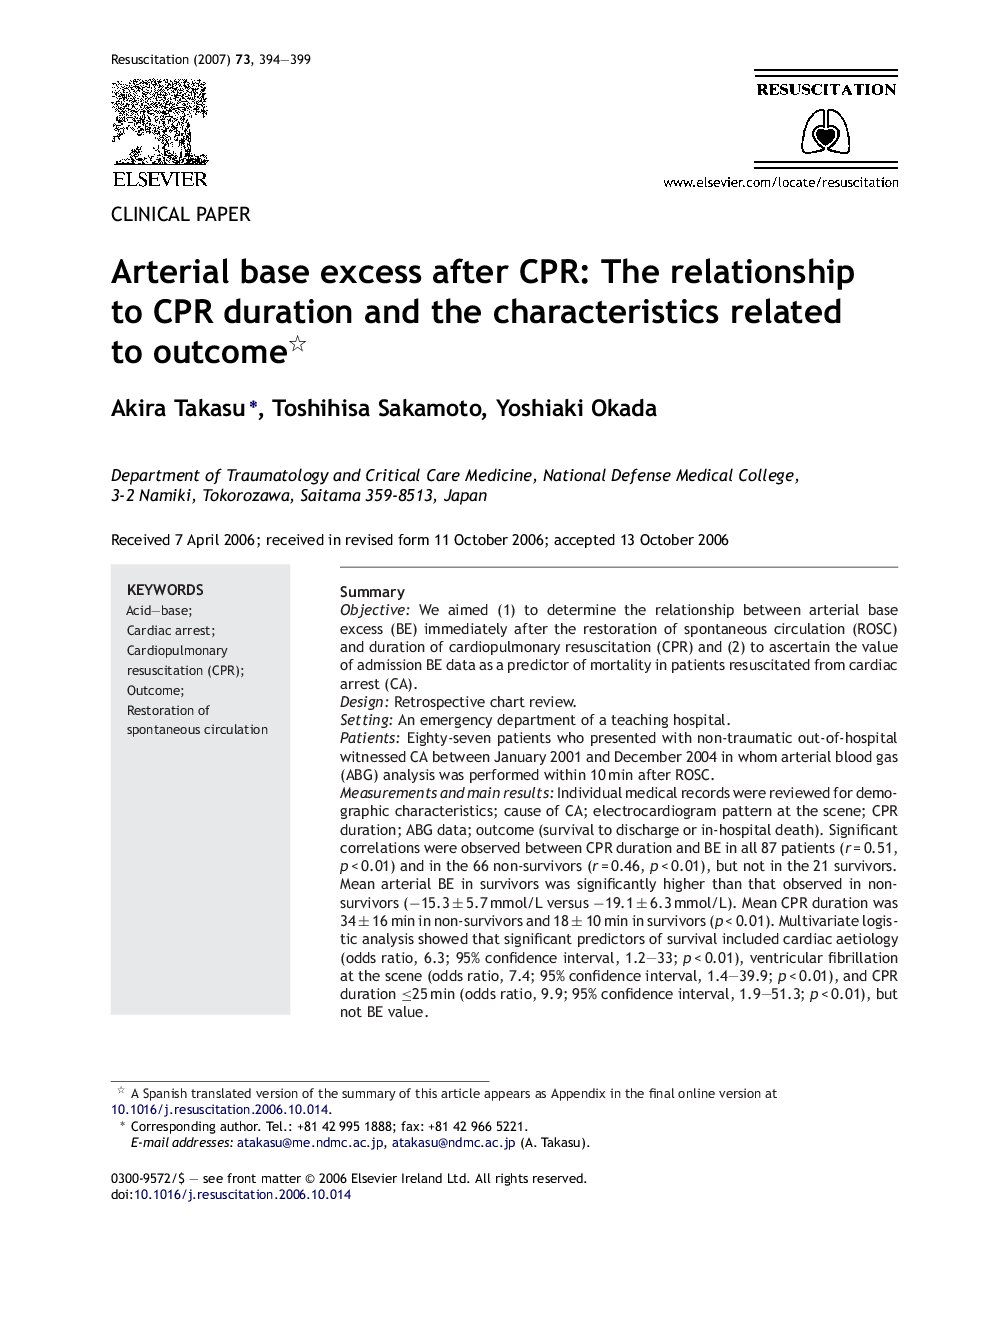 Arterial base excess after CPR: The relationship to CPR duration and the characteristics related to outcome 